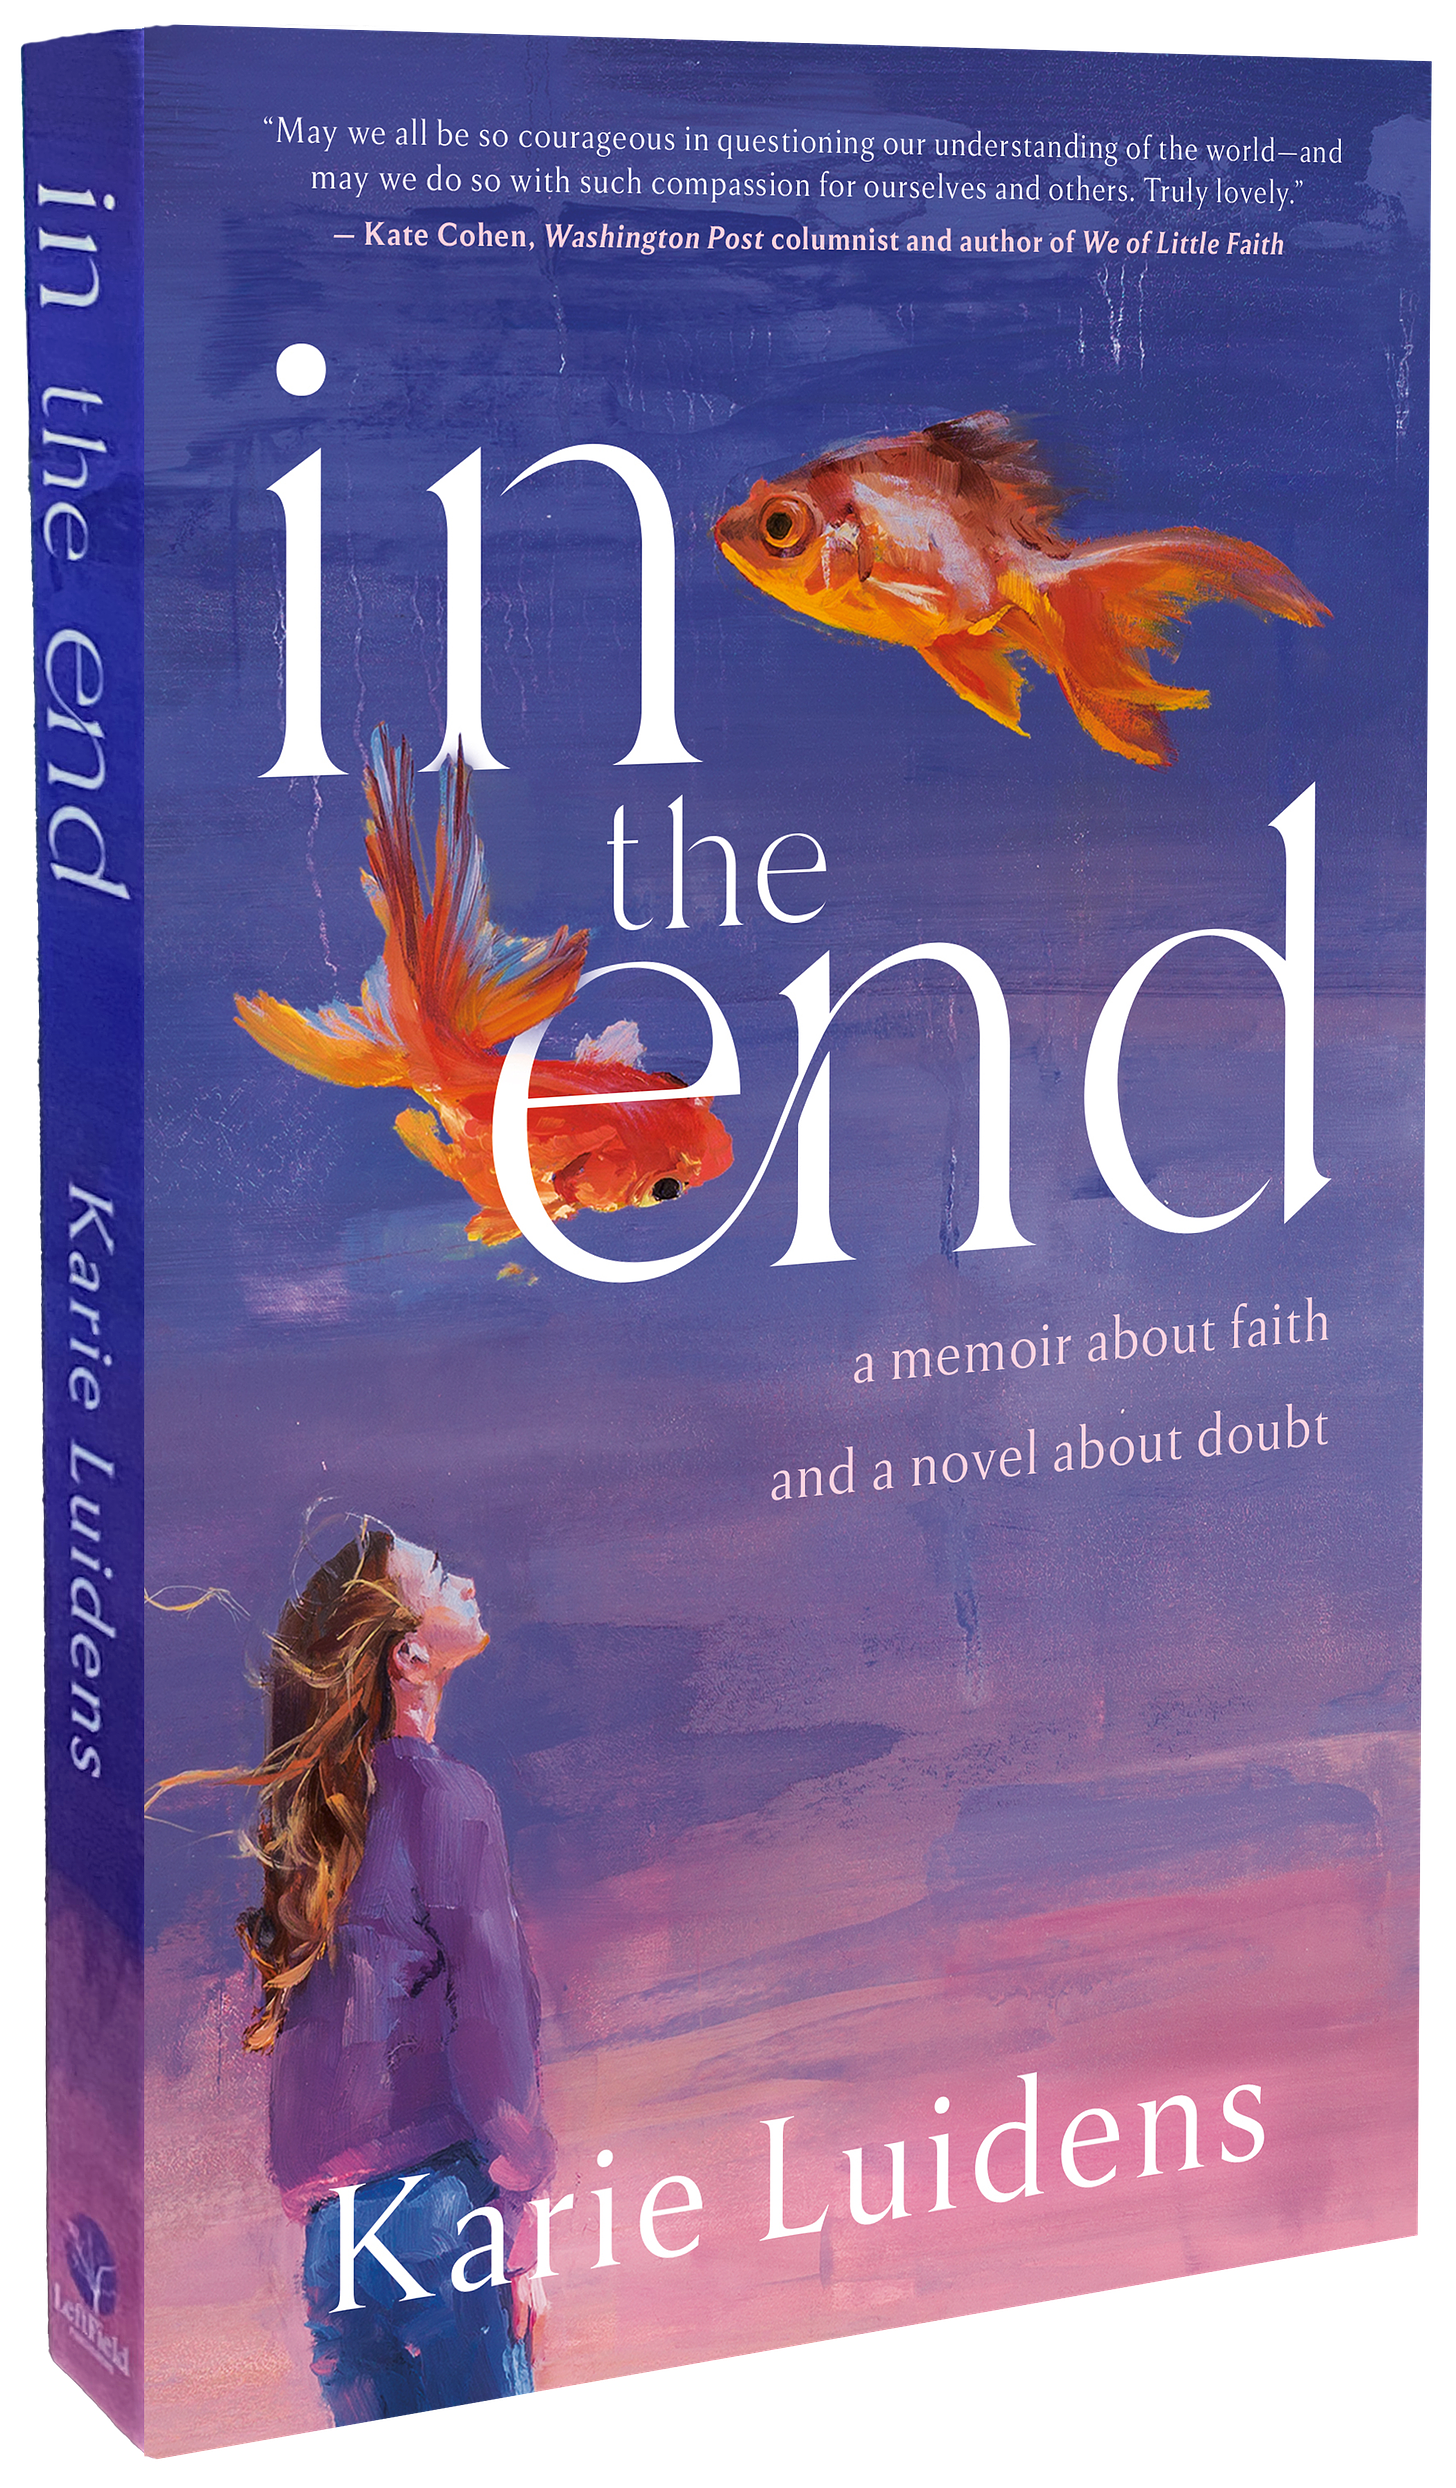 The cover is done in shades of dark bluish purple fading to pink at the bottom, with a young woman looking up in the lower lefthand corner, and two goldfish swimming around the title "in the end."